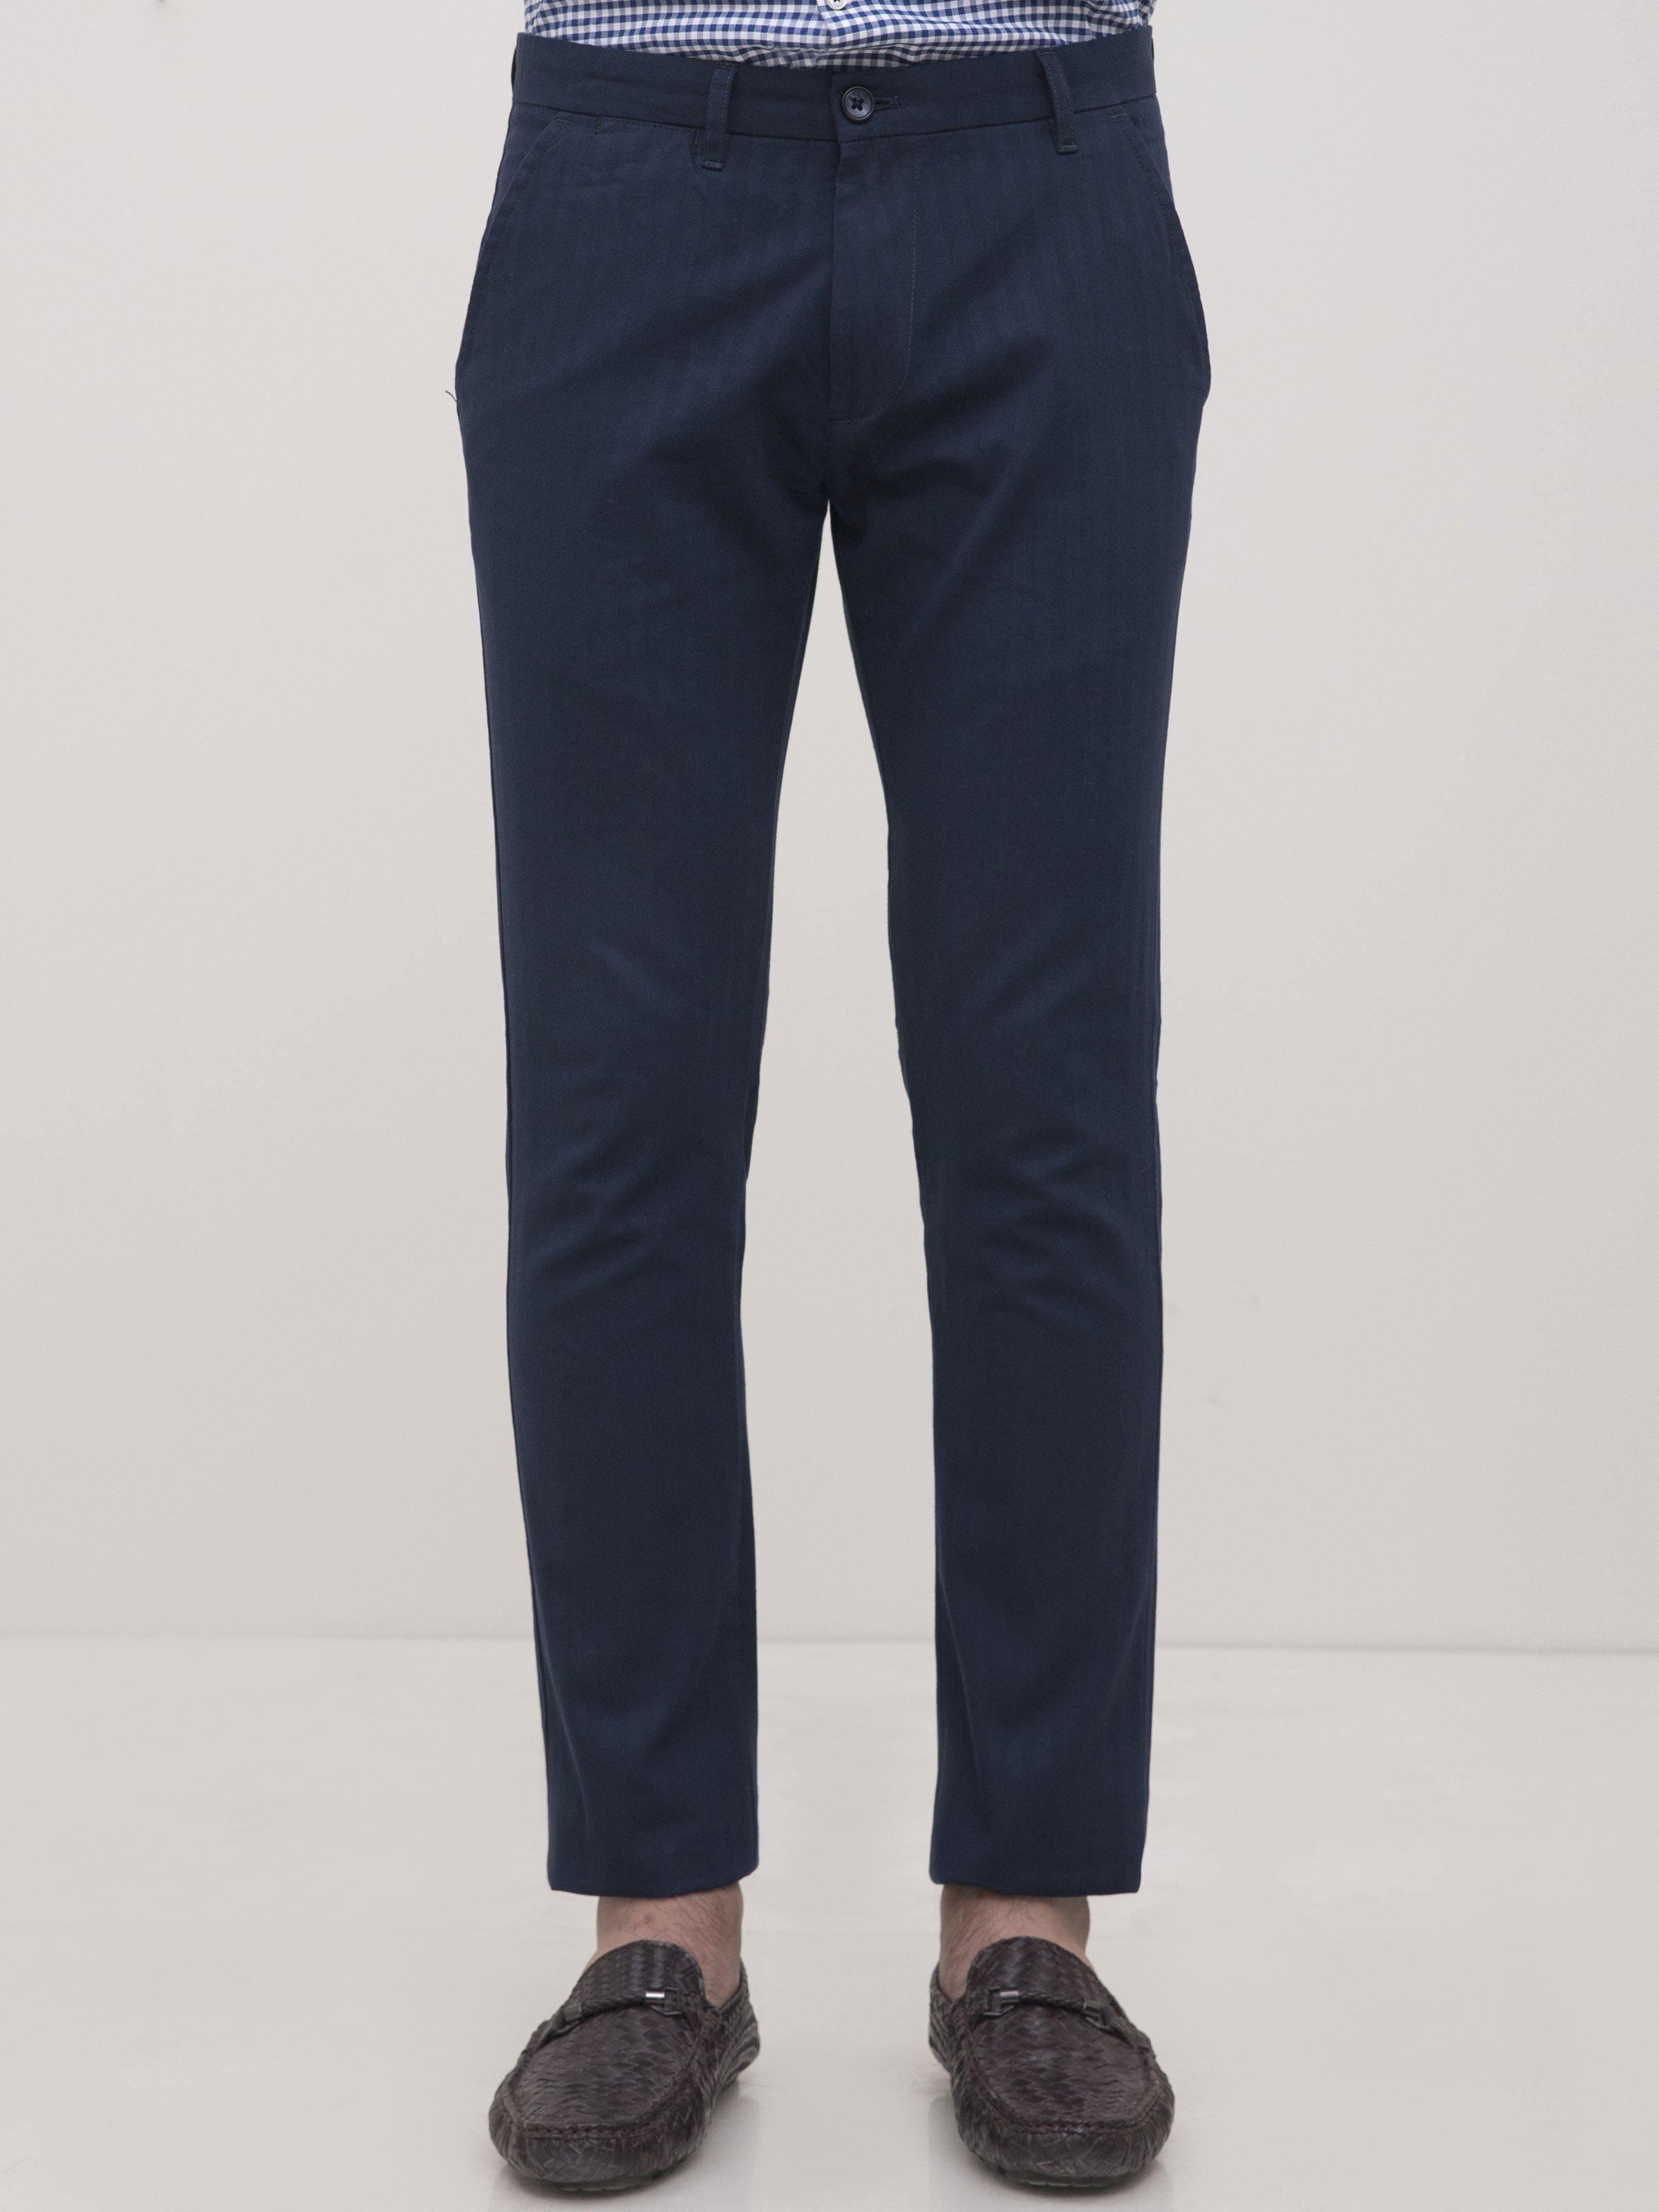 CASUAL PANT CROSS POCKET WITH DOUBLE BONE SLIM FIT NAVY at Charcoal Clothing